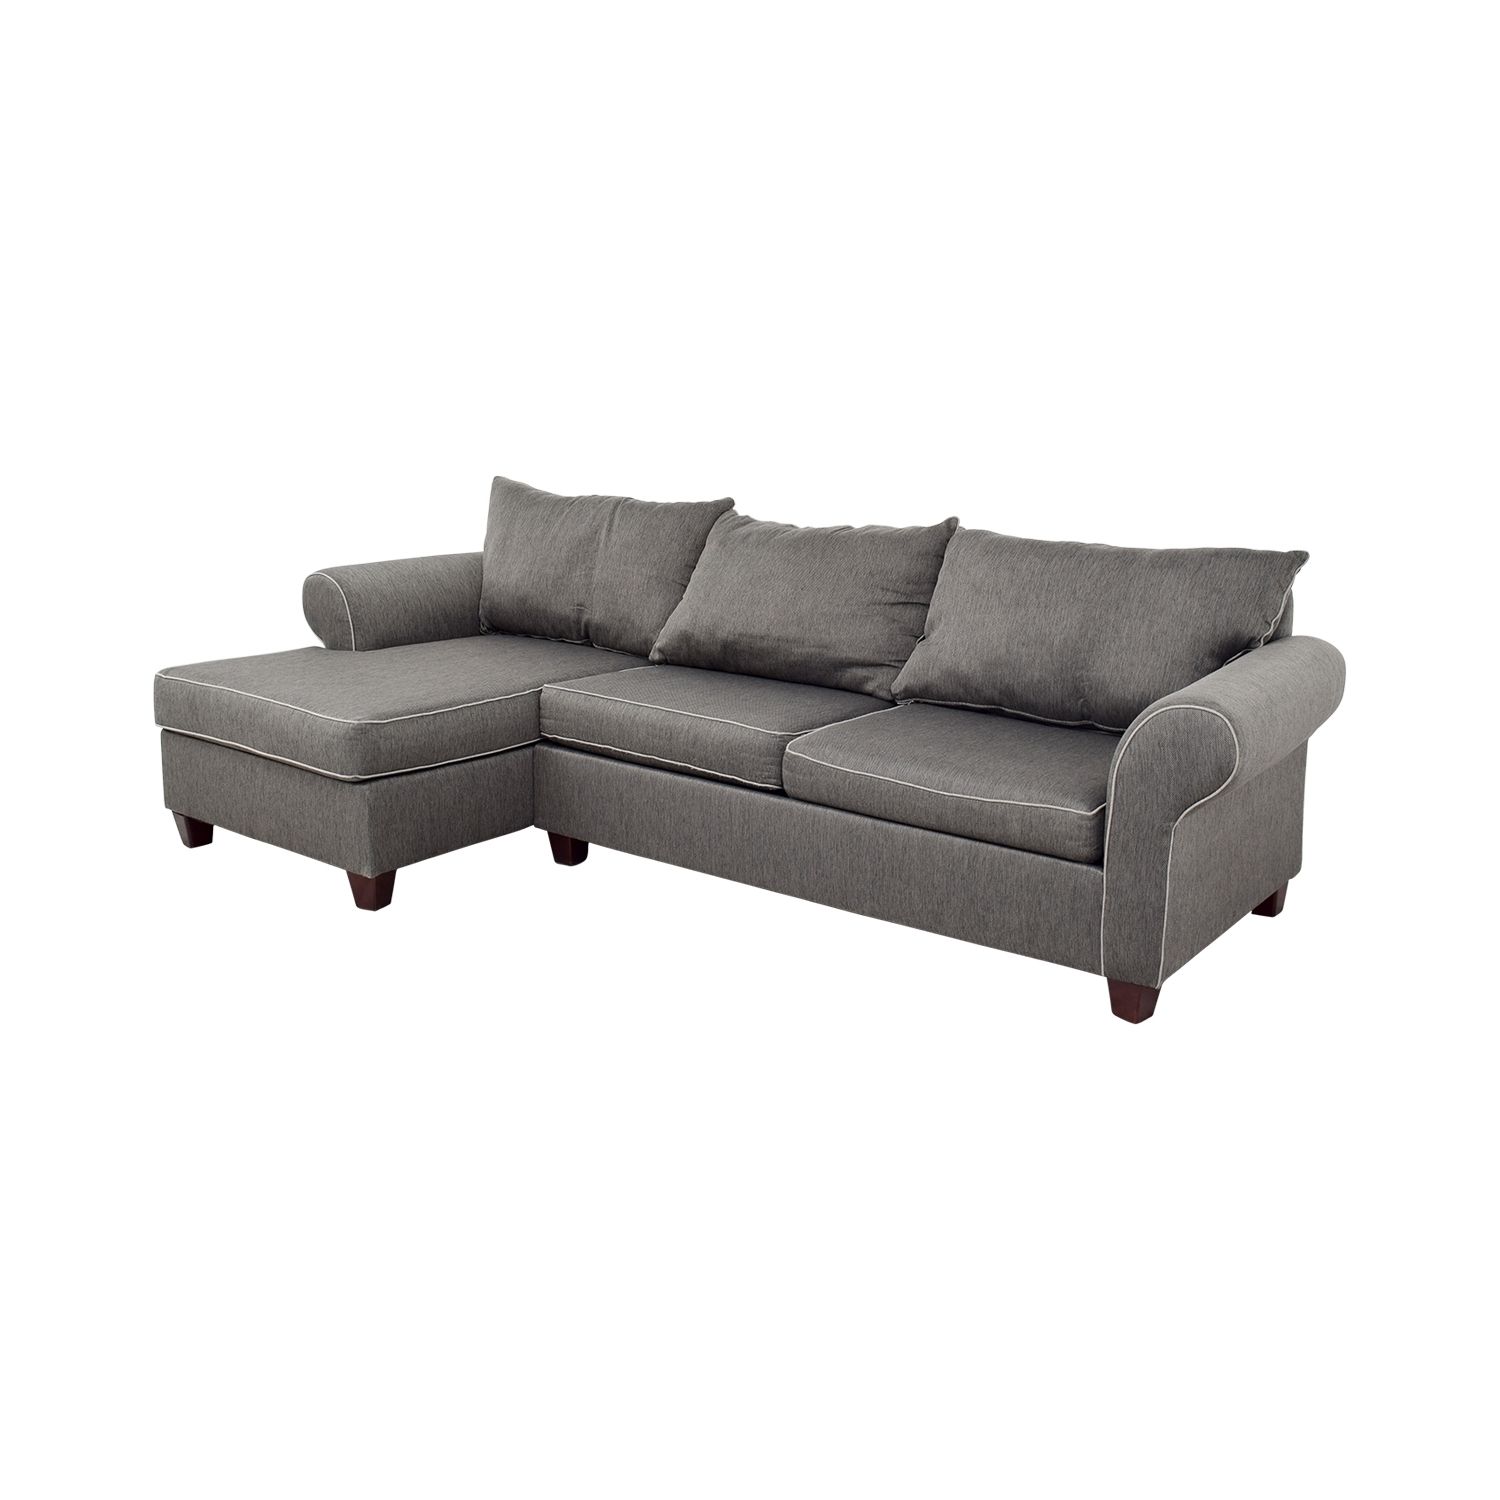 [%58% Off – Bob's Furniture Bob's Furniture Grey Chaise Sectional For Most Up To Date Bobs Furniture Chaises|bobs Furniture Chaises For Newest 58% Off – Bob's Furniture Bob's Furniture Grey Chaise Sectional|fashionable Bobs Furniture Chaises For 58% Off – Bob's Furniture Bob's Furniture Grey Chaise Sectional|fashionable 58% Off – Bob's Furniture Bob's Furniture Grey Chaise Sectional Throughout Bobs Furniture Chaises%] (Photo 2 of 15)